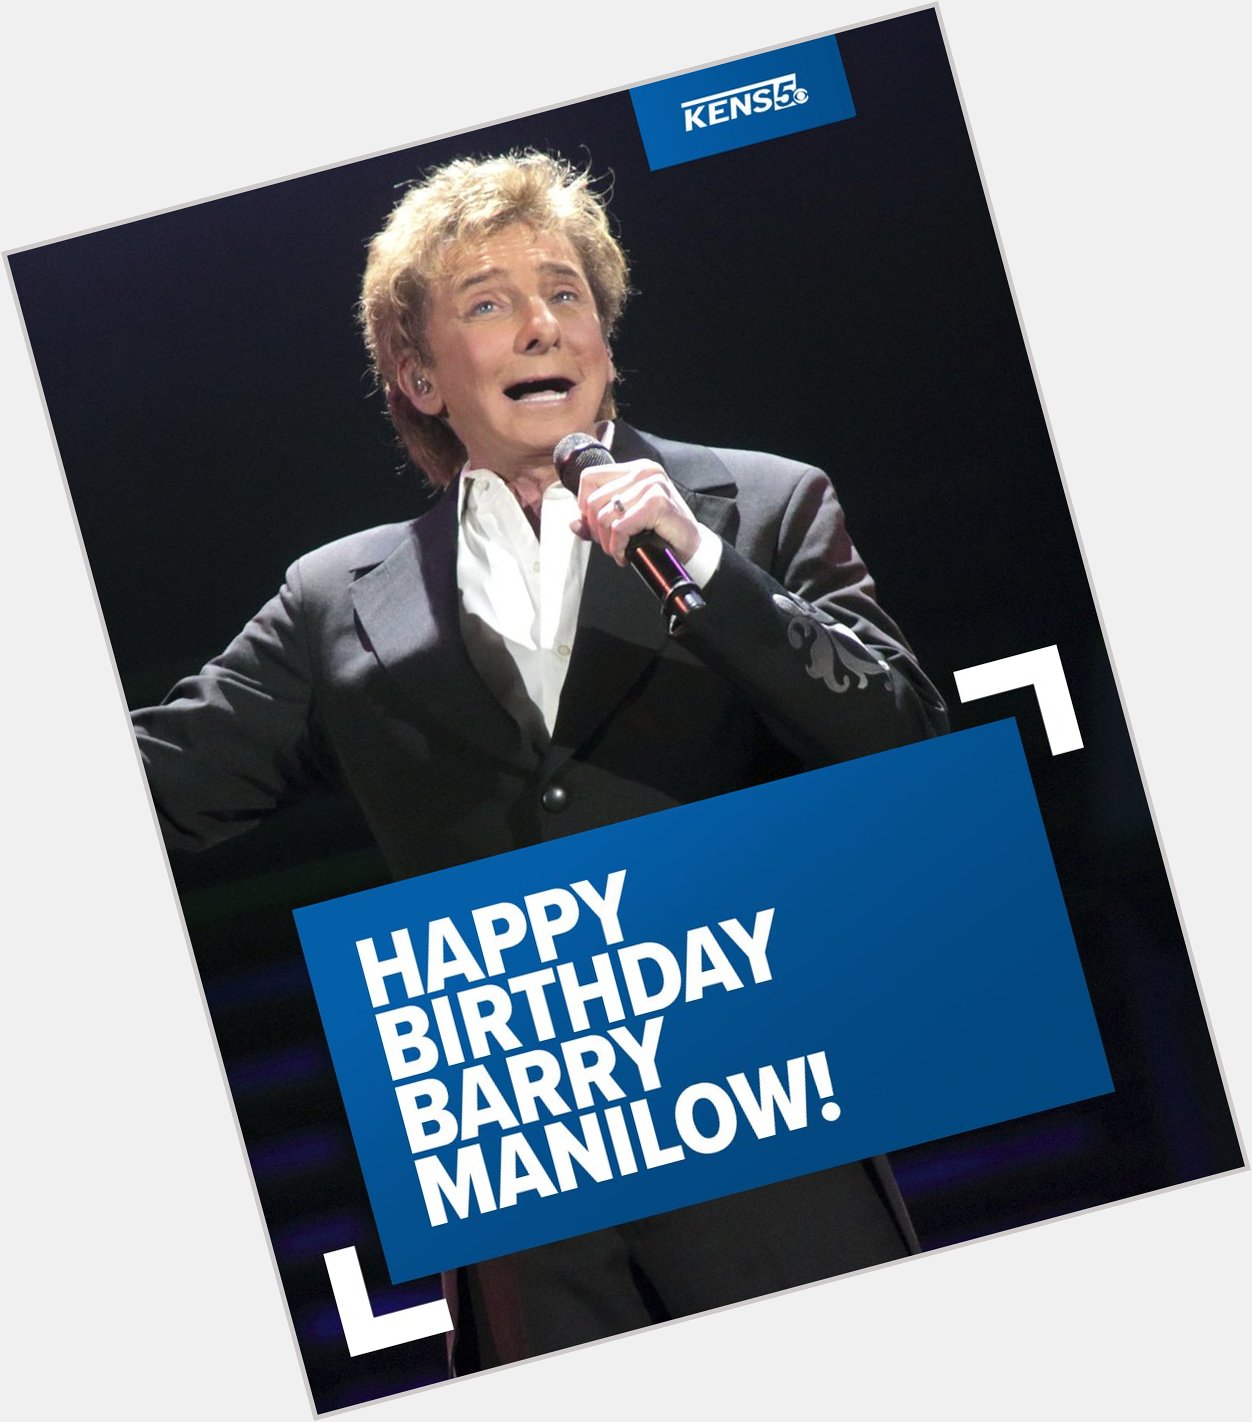 Join us in wishing a very HAPPY BIRTHDAY to Barry Manilow, who is 79 years old today.  